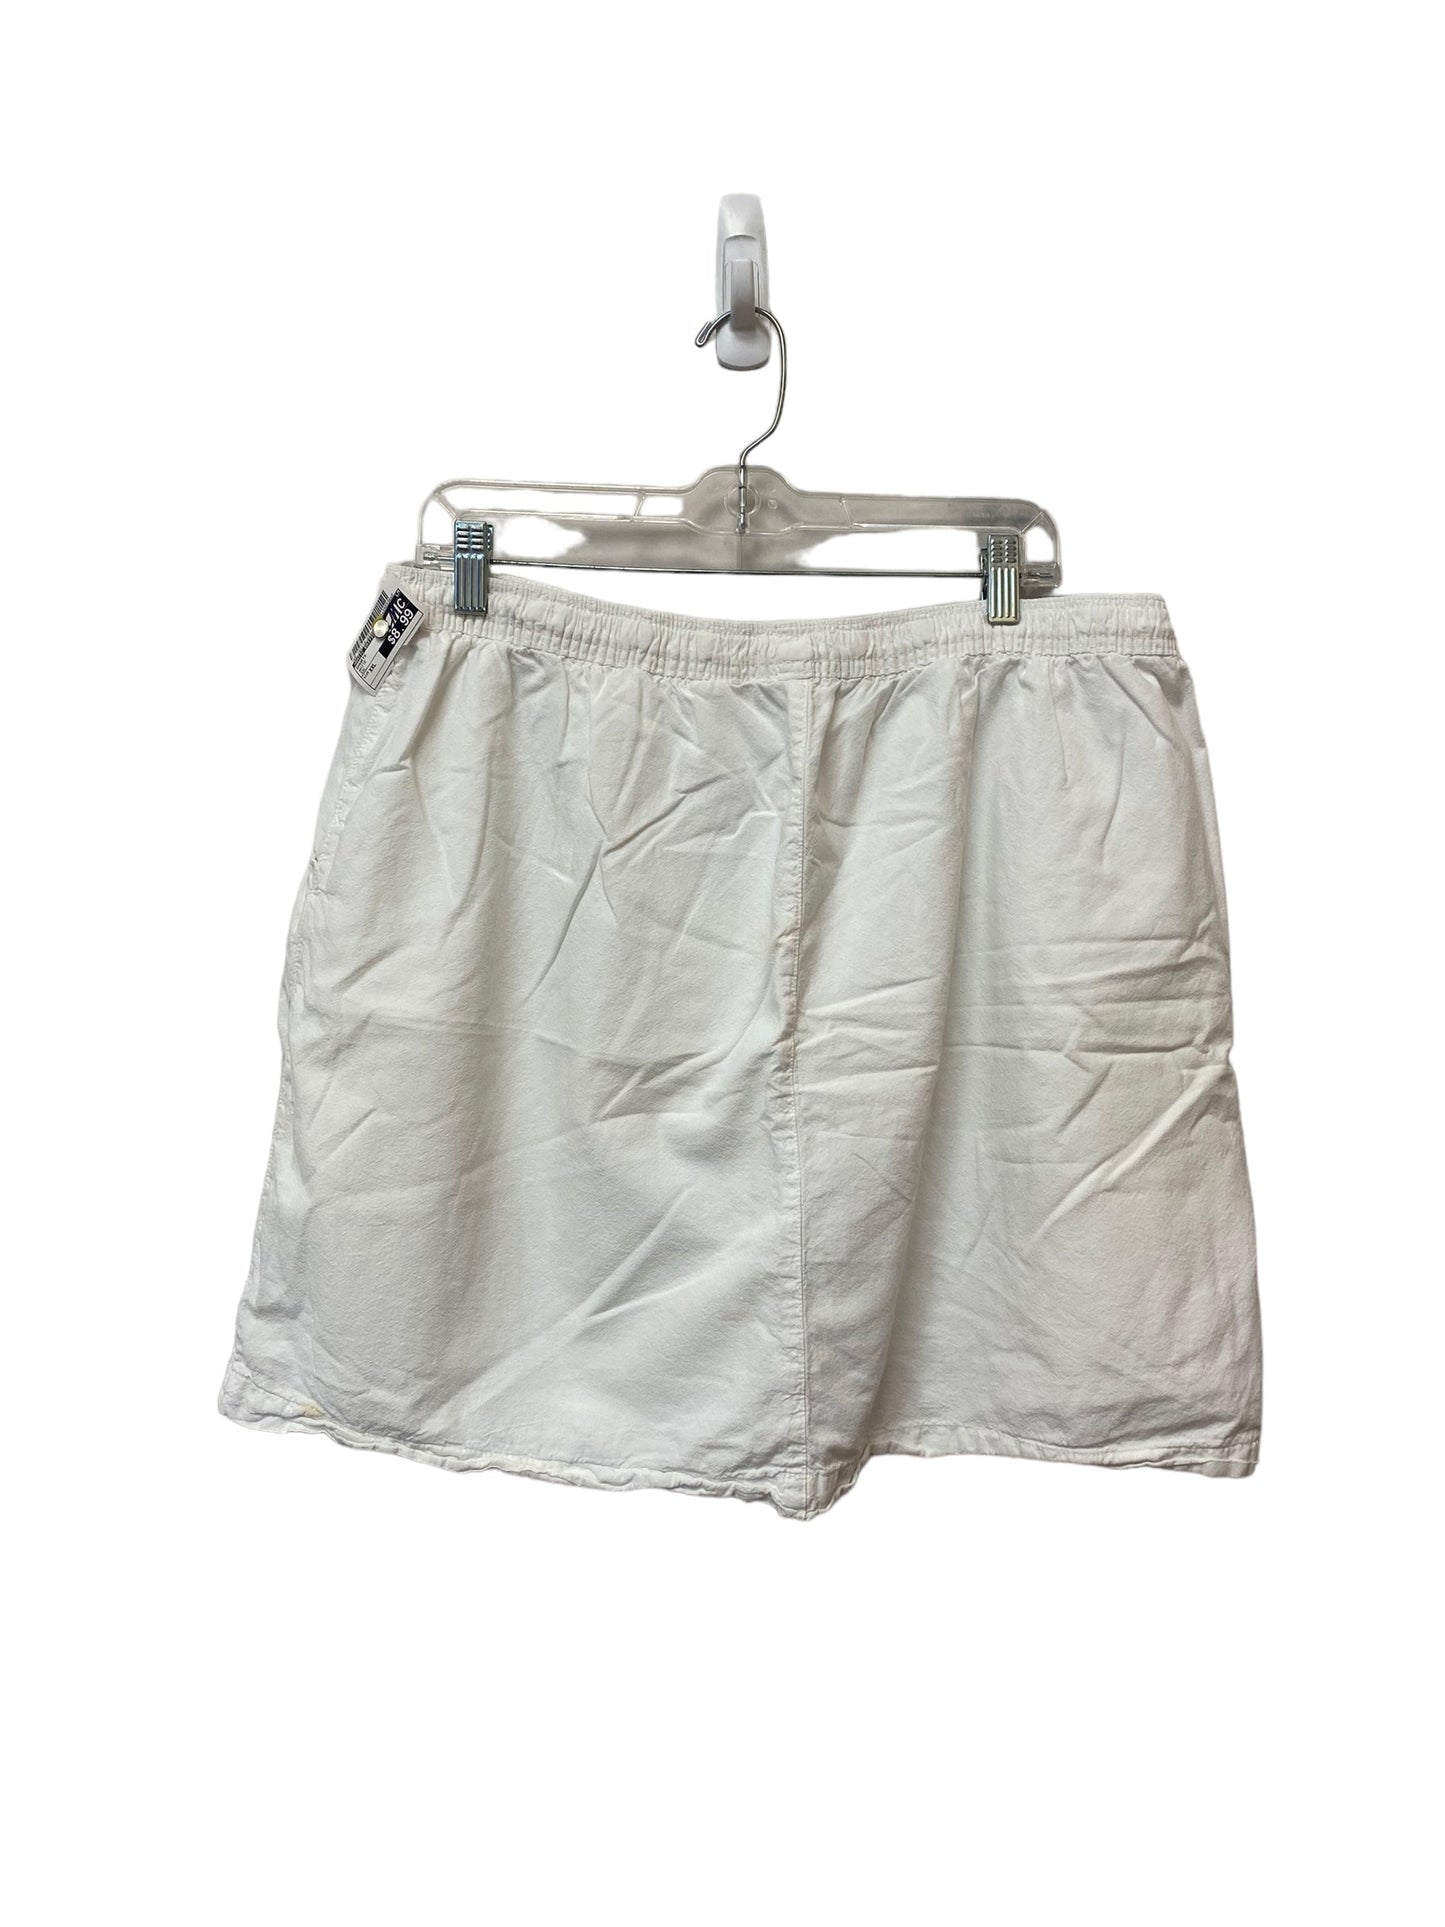 Shorts By Basic Editions  Size: Xxl